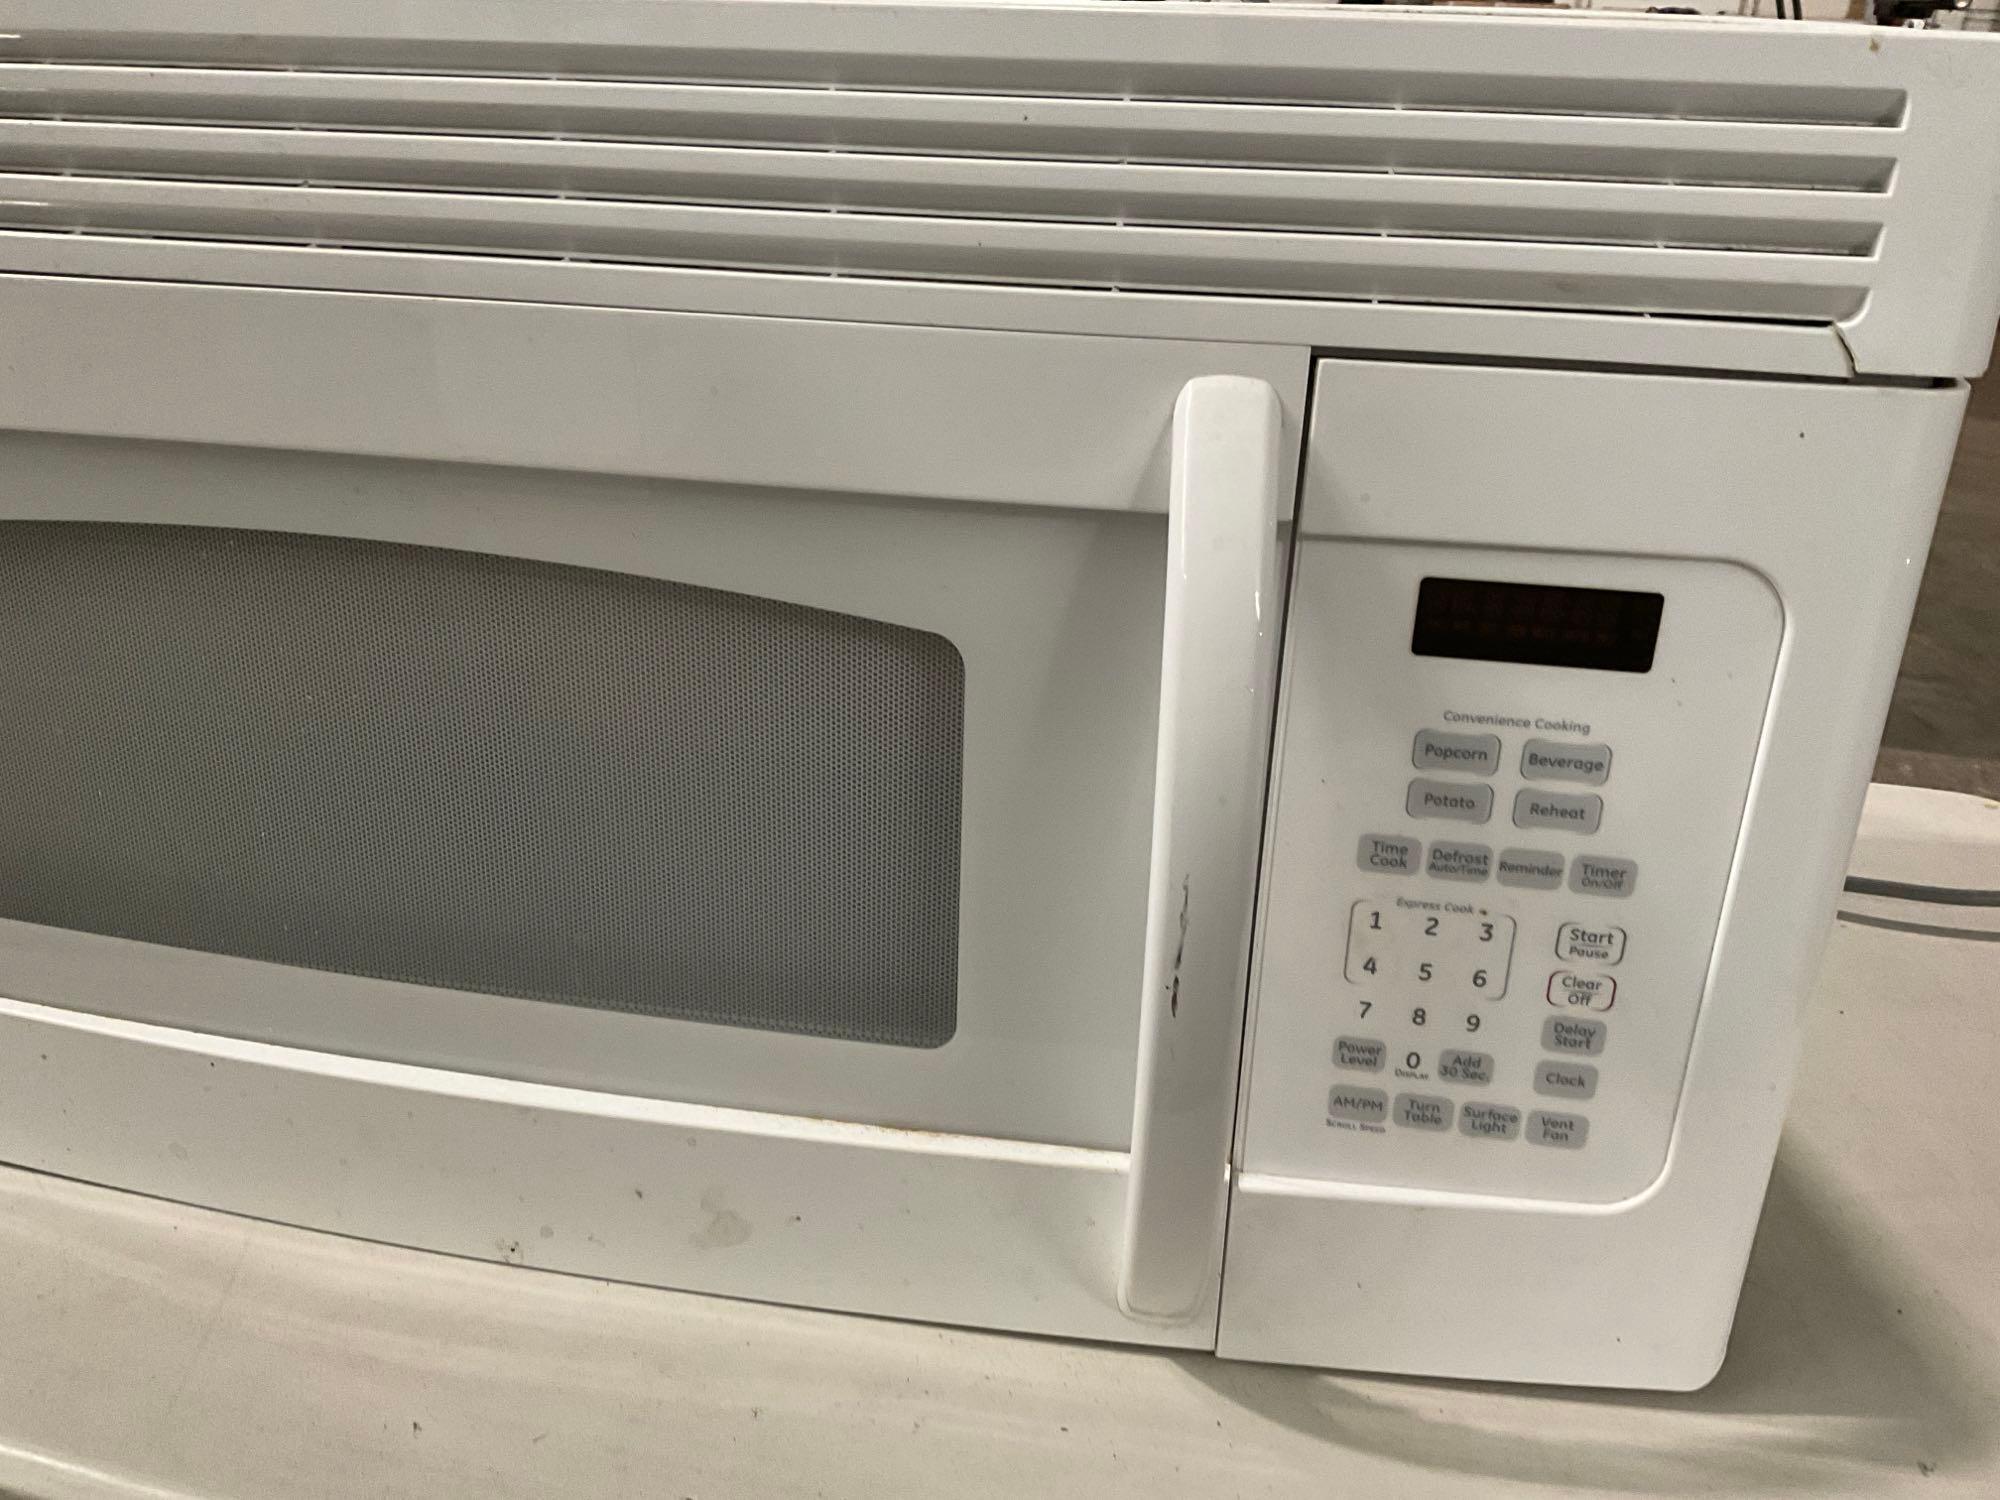 GE Spacemaker Over-the-Range Microwave